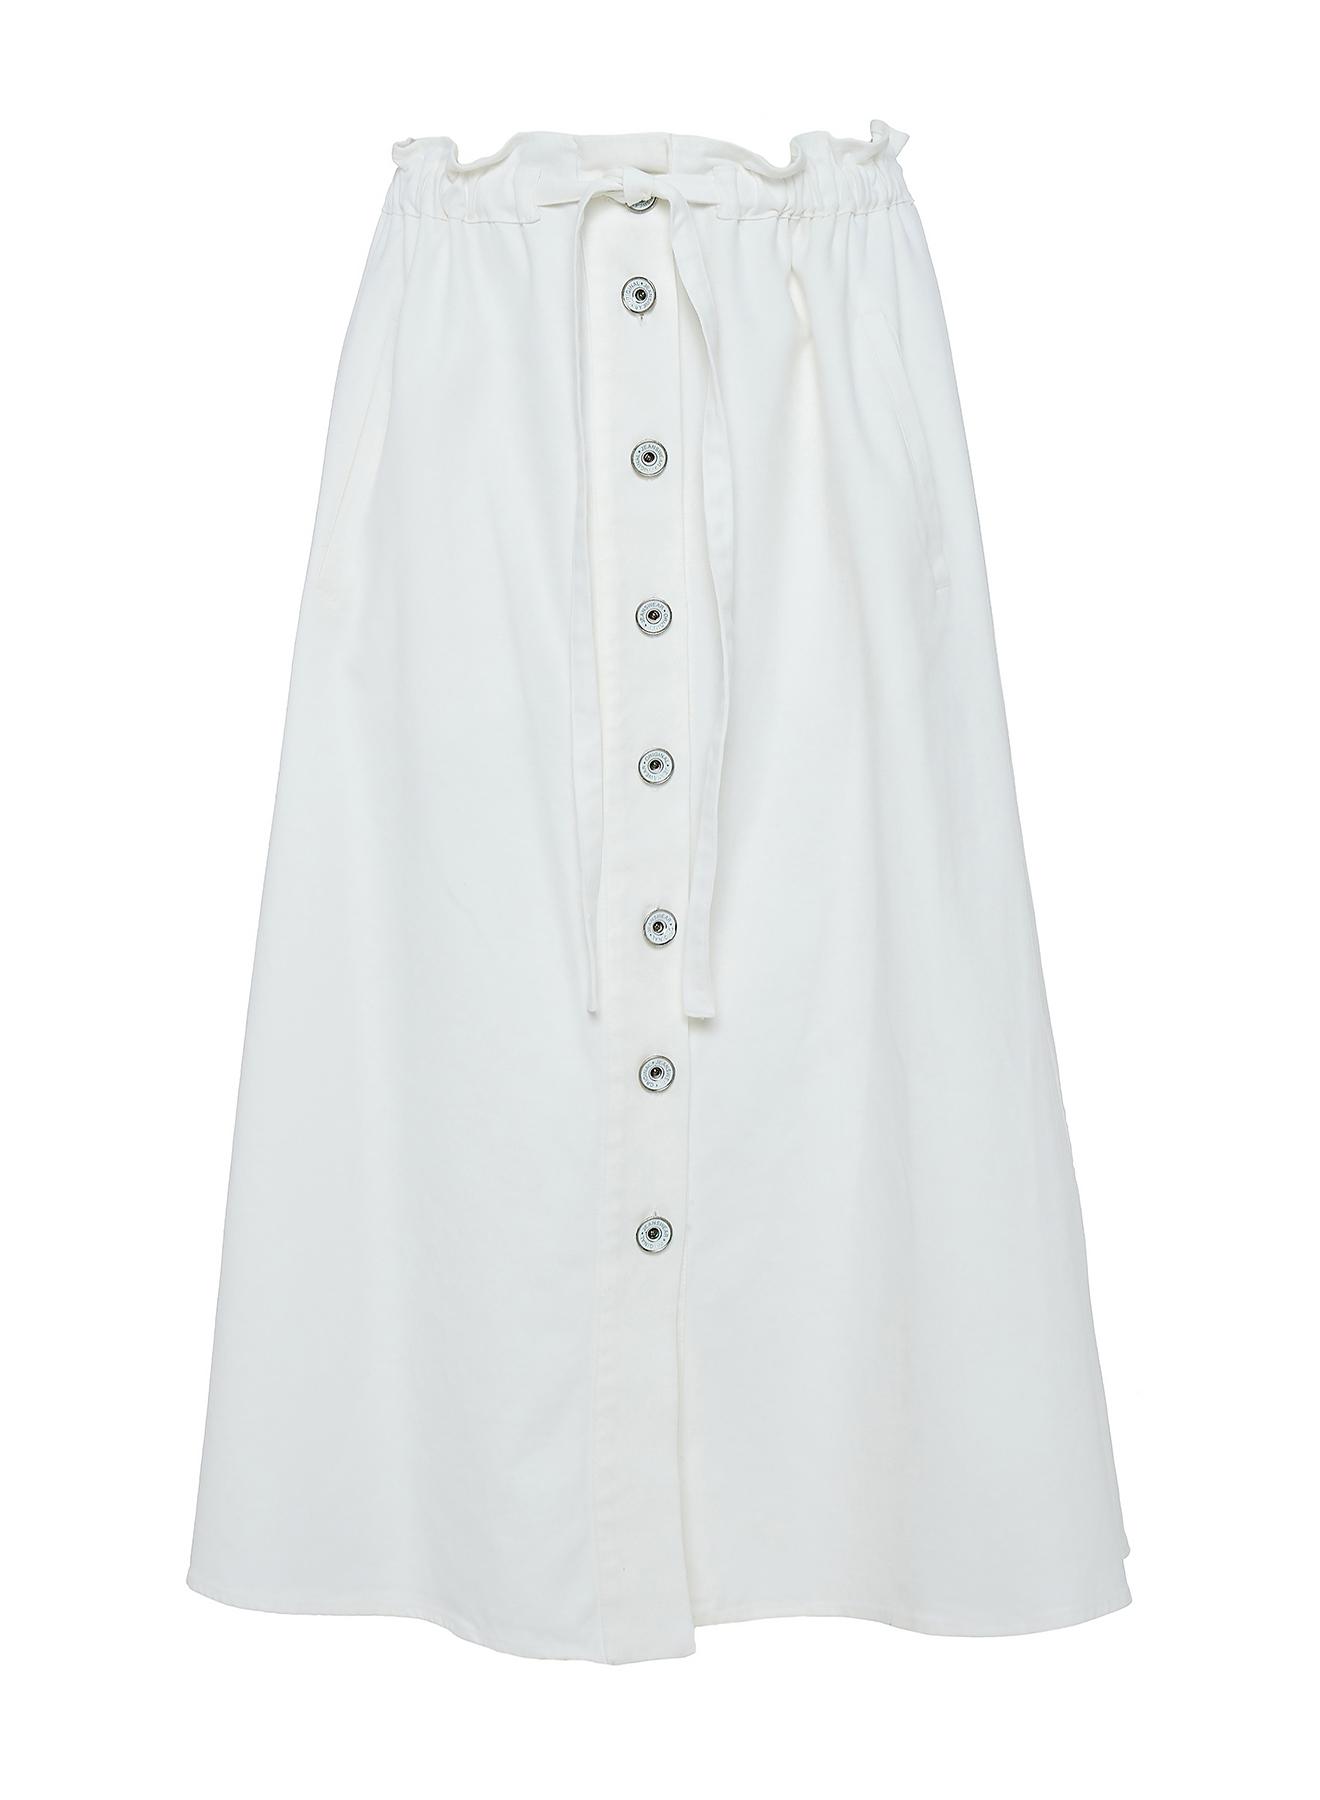 Off White denim Skirt with buttons "ELONA" Devotion Twins - 1